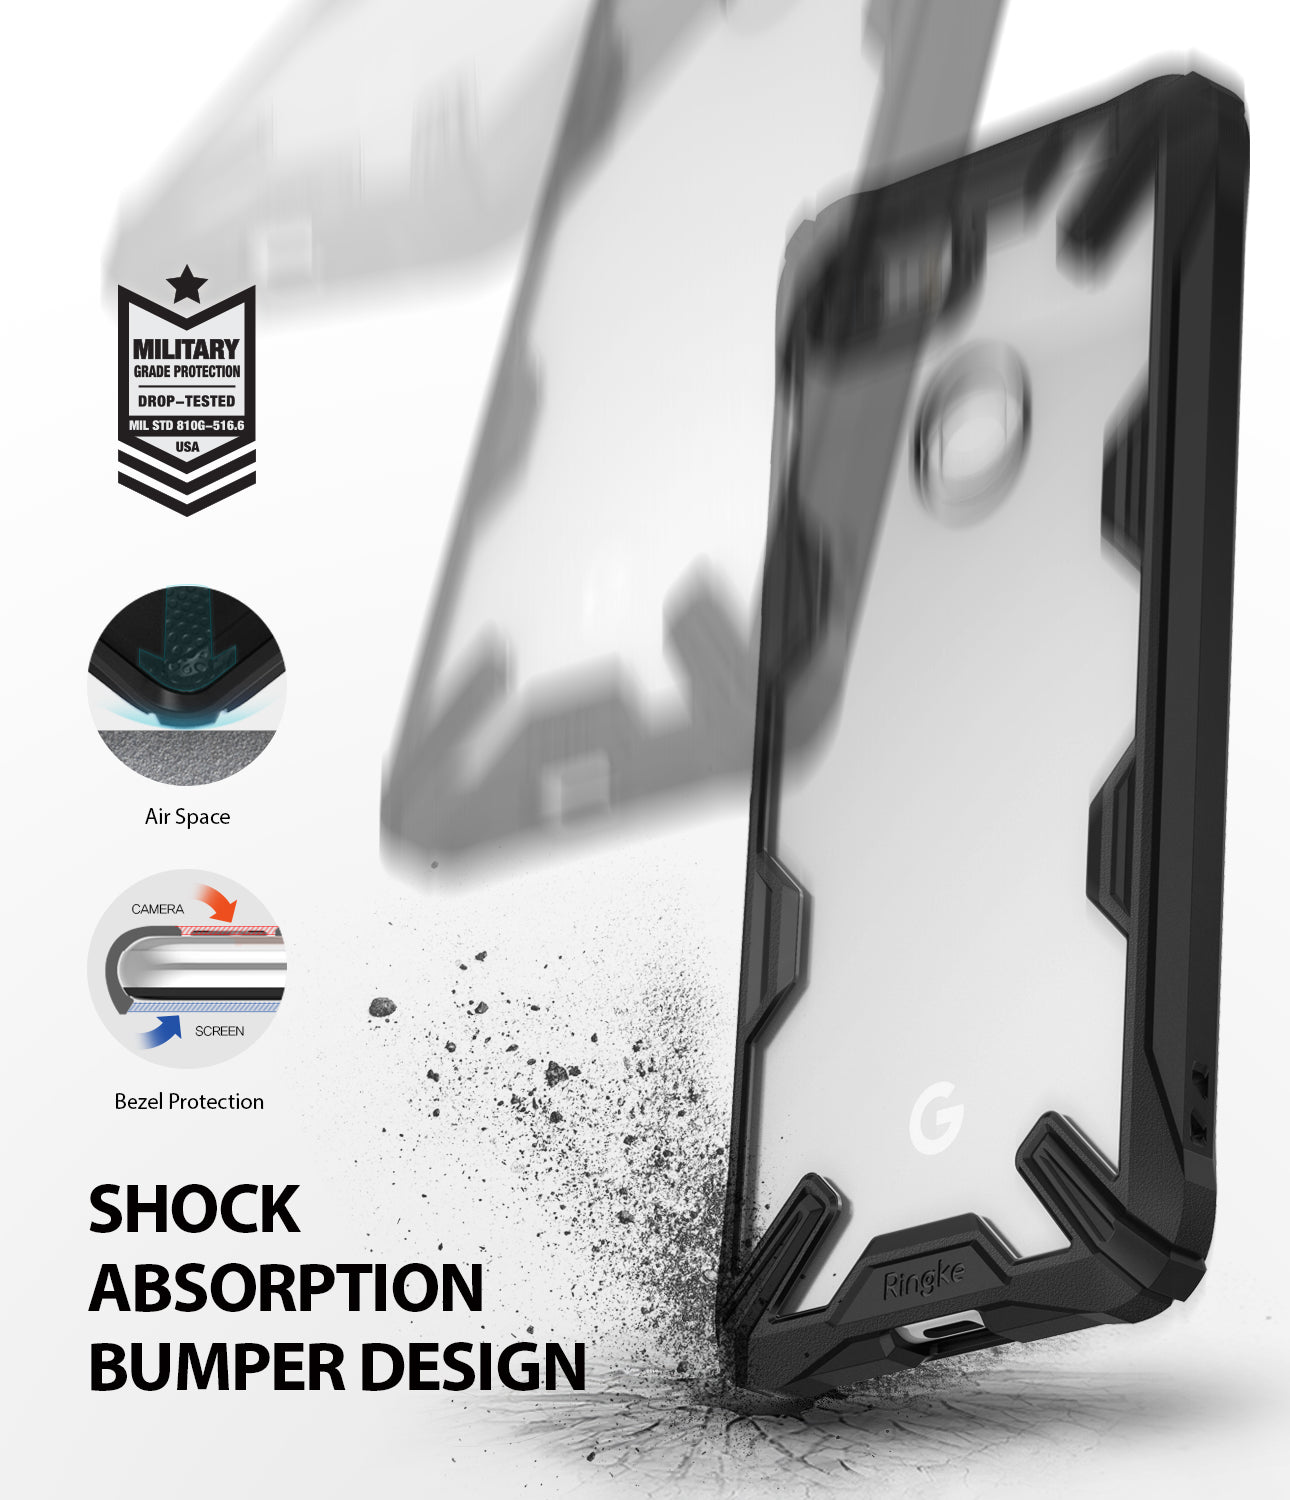 ringke fusion-x rugged heavy duty clear back case cover for google pixel 3 xl main shockproof protection